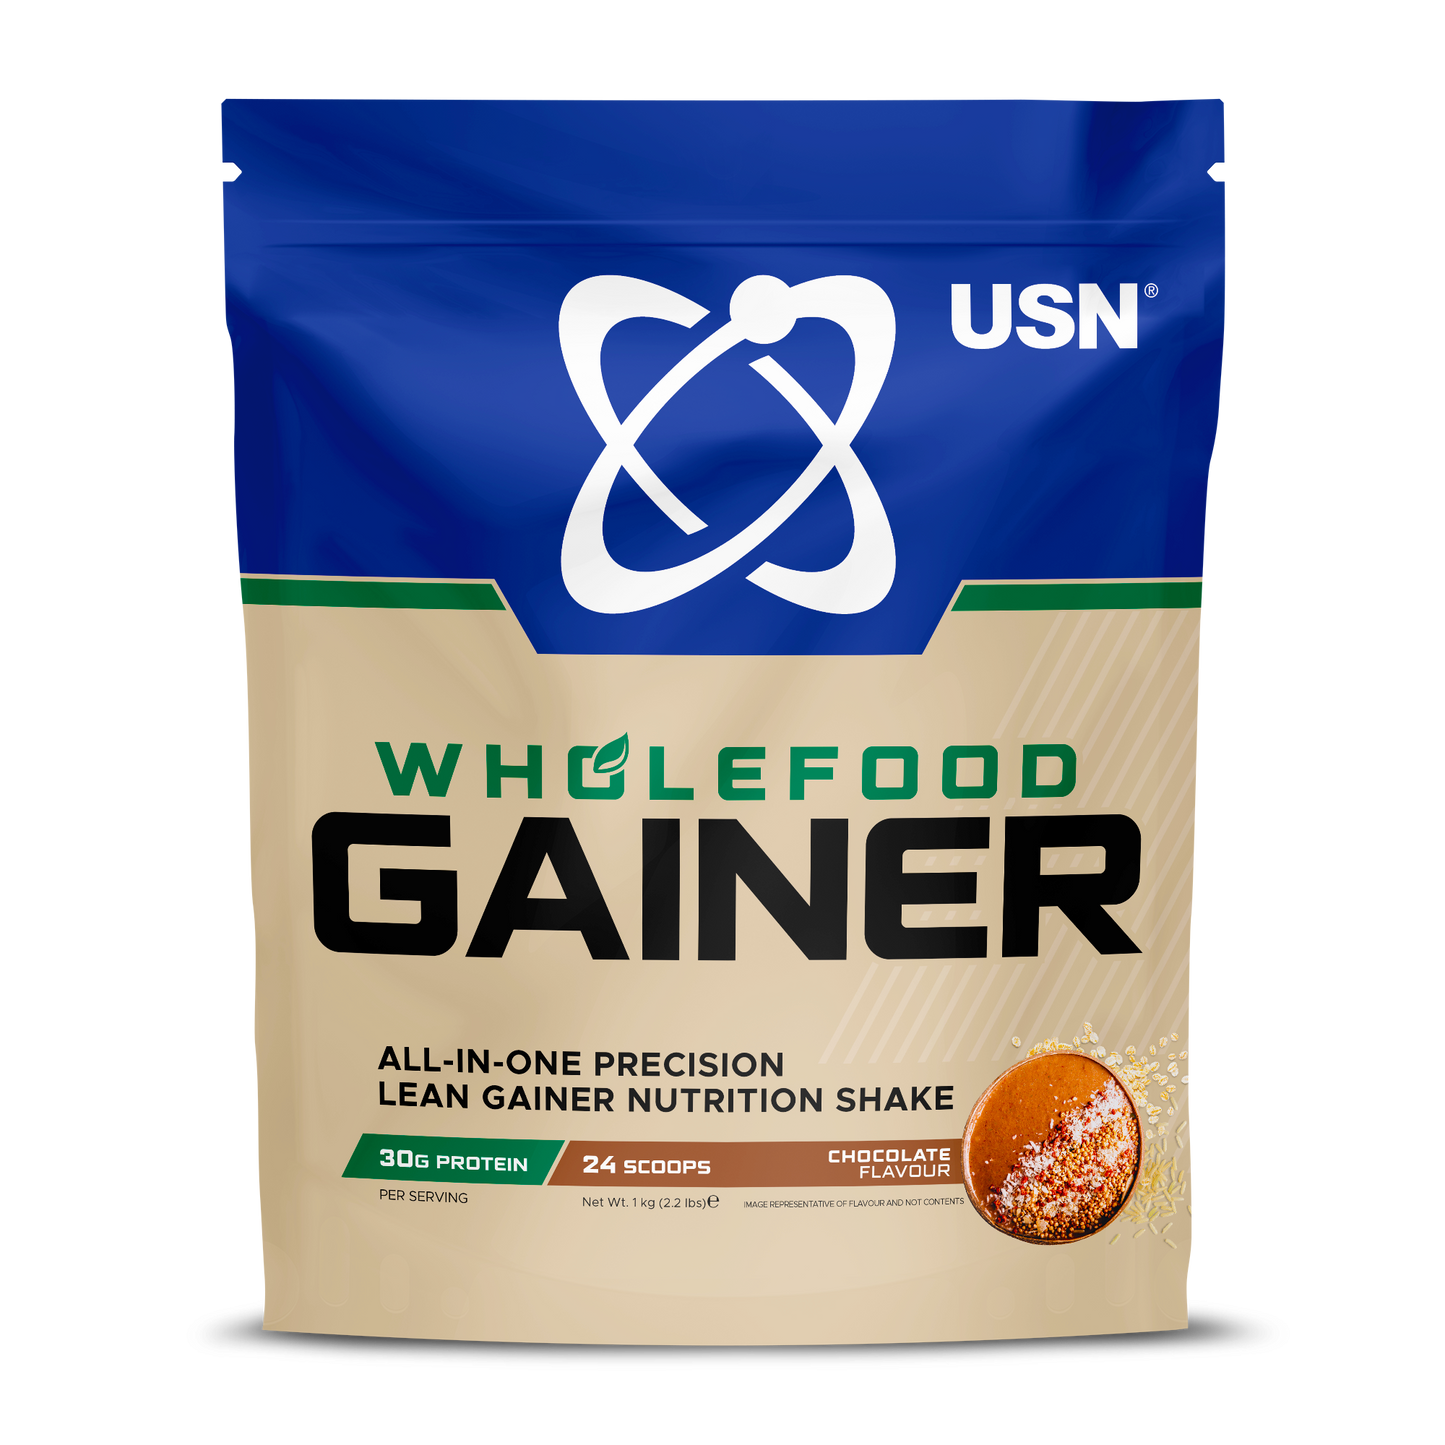 Wholefood Gainer - Vegan All-In-One Mass Gainer